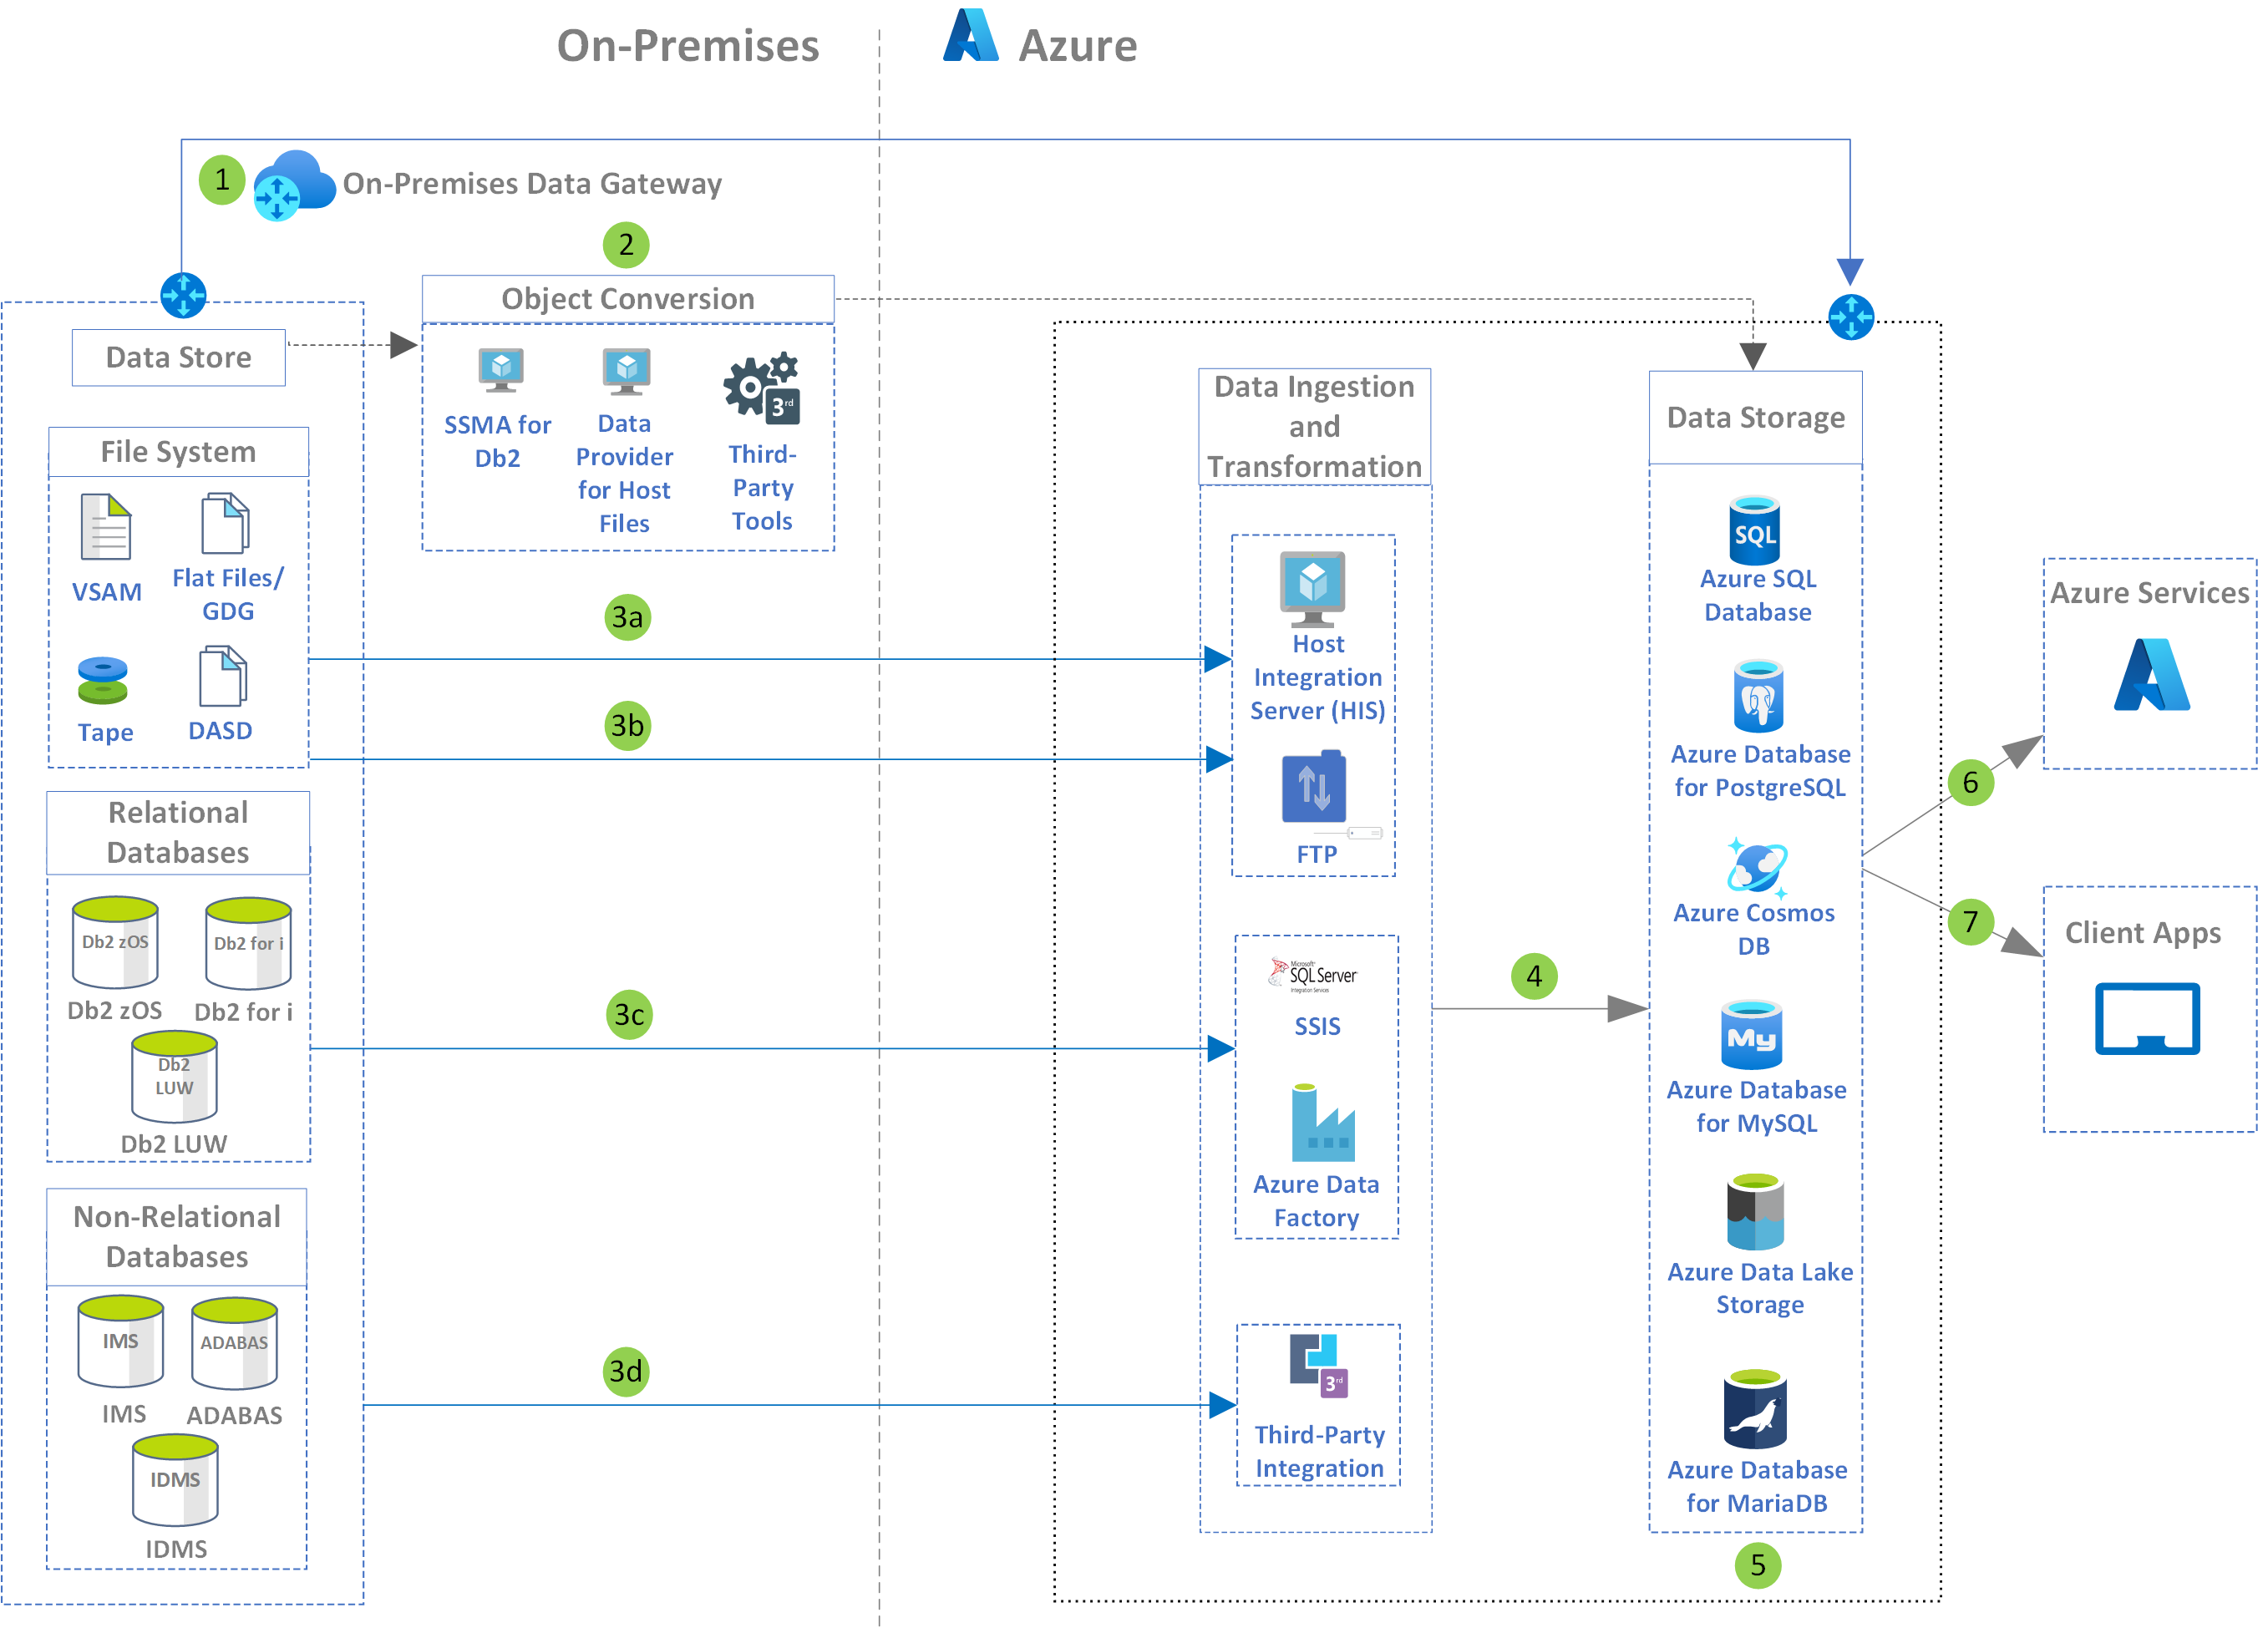 Architecture diagram showing how to modernize mainframe and midrange systems by migrating data to Azure.